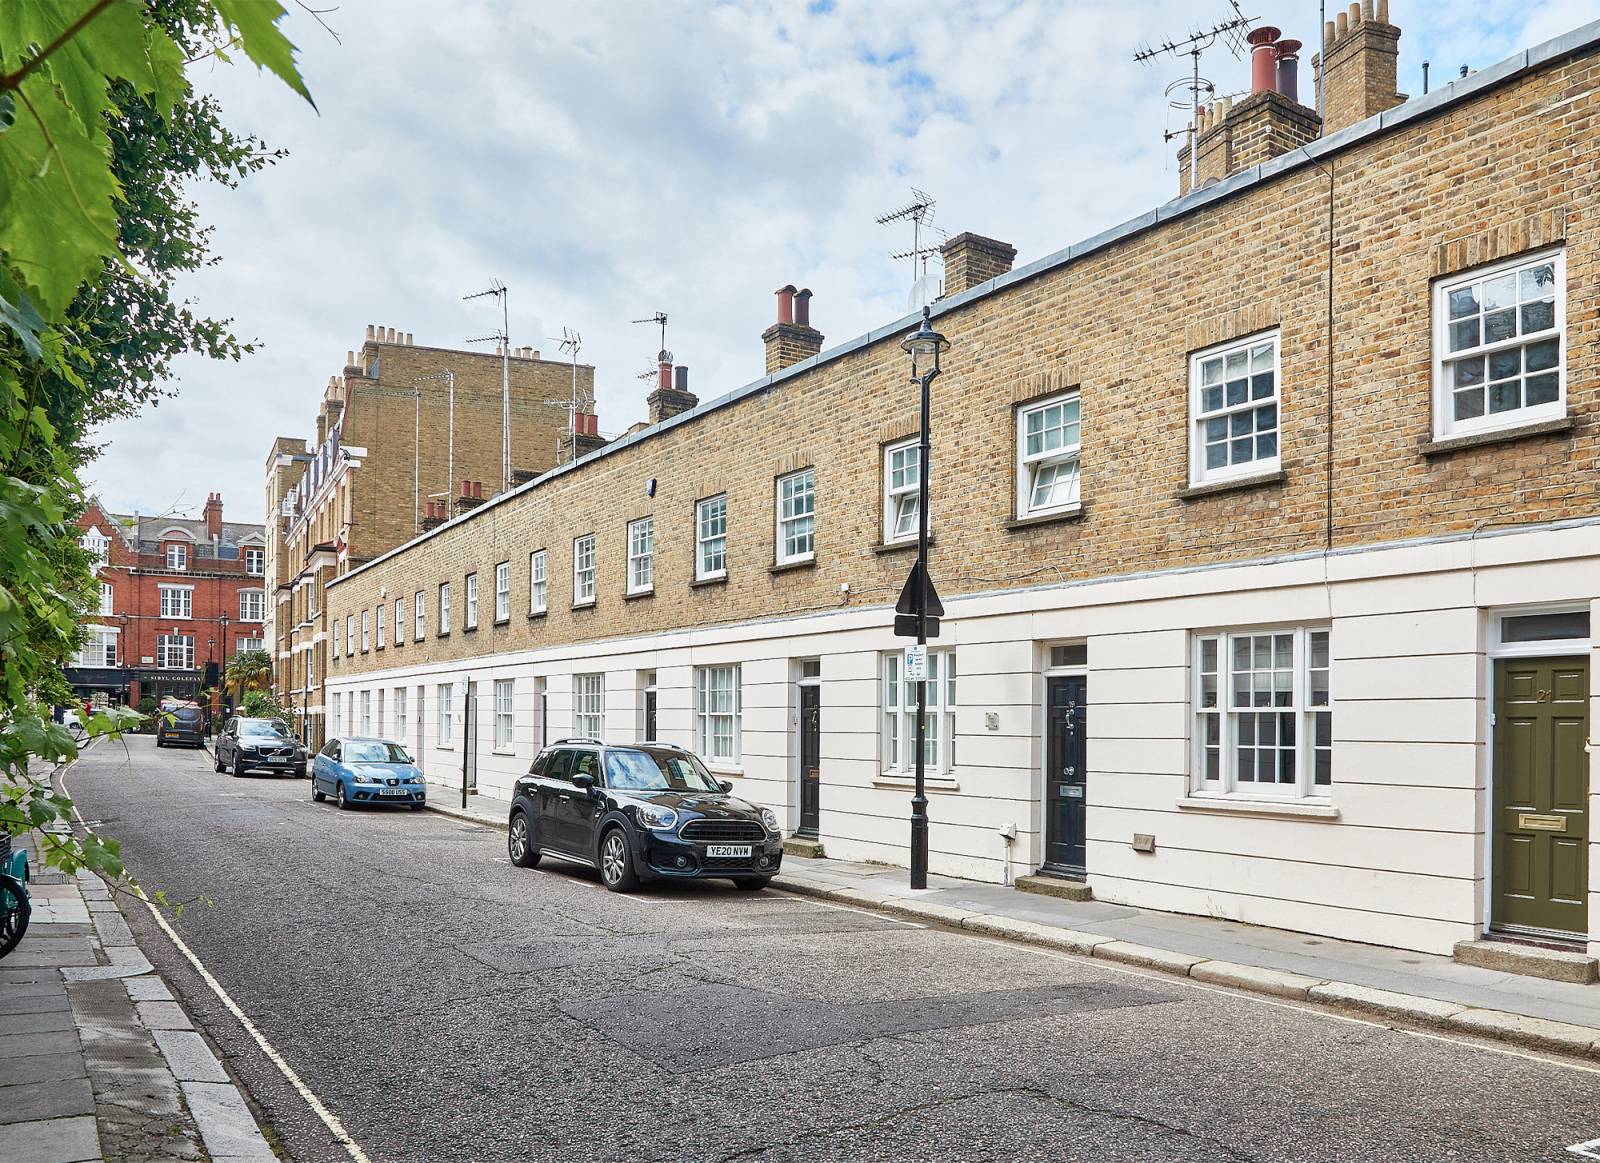 New build homes and developments in Belgravia